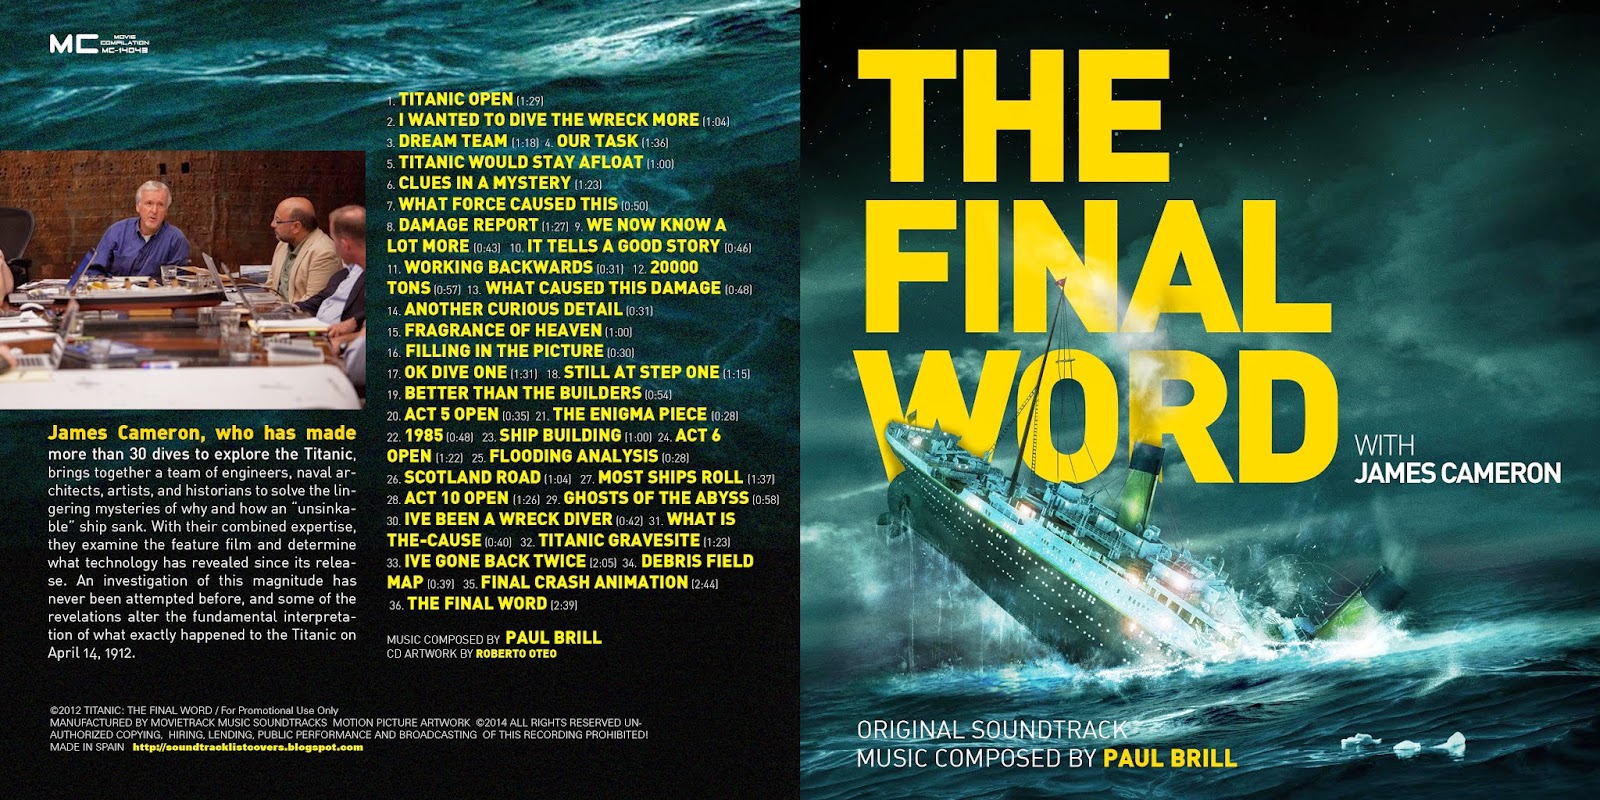 Soundtrack List Covers: Titanic: The Final Word (Paul Brill)